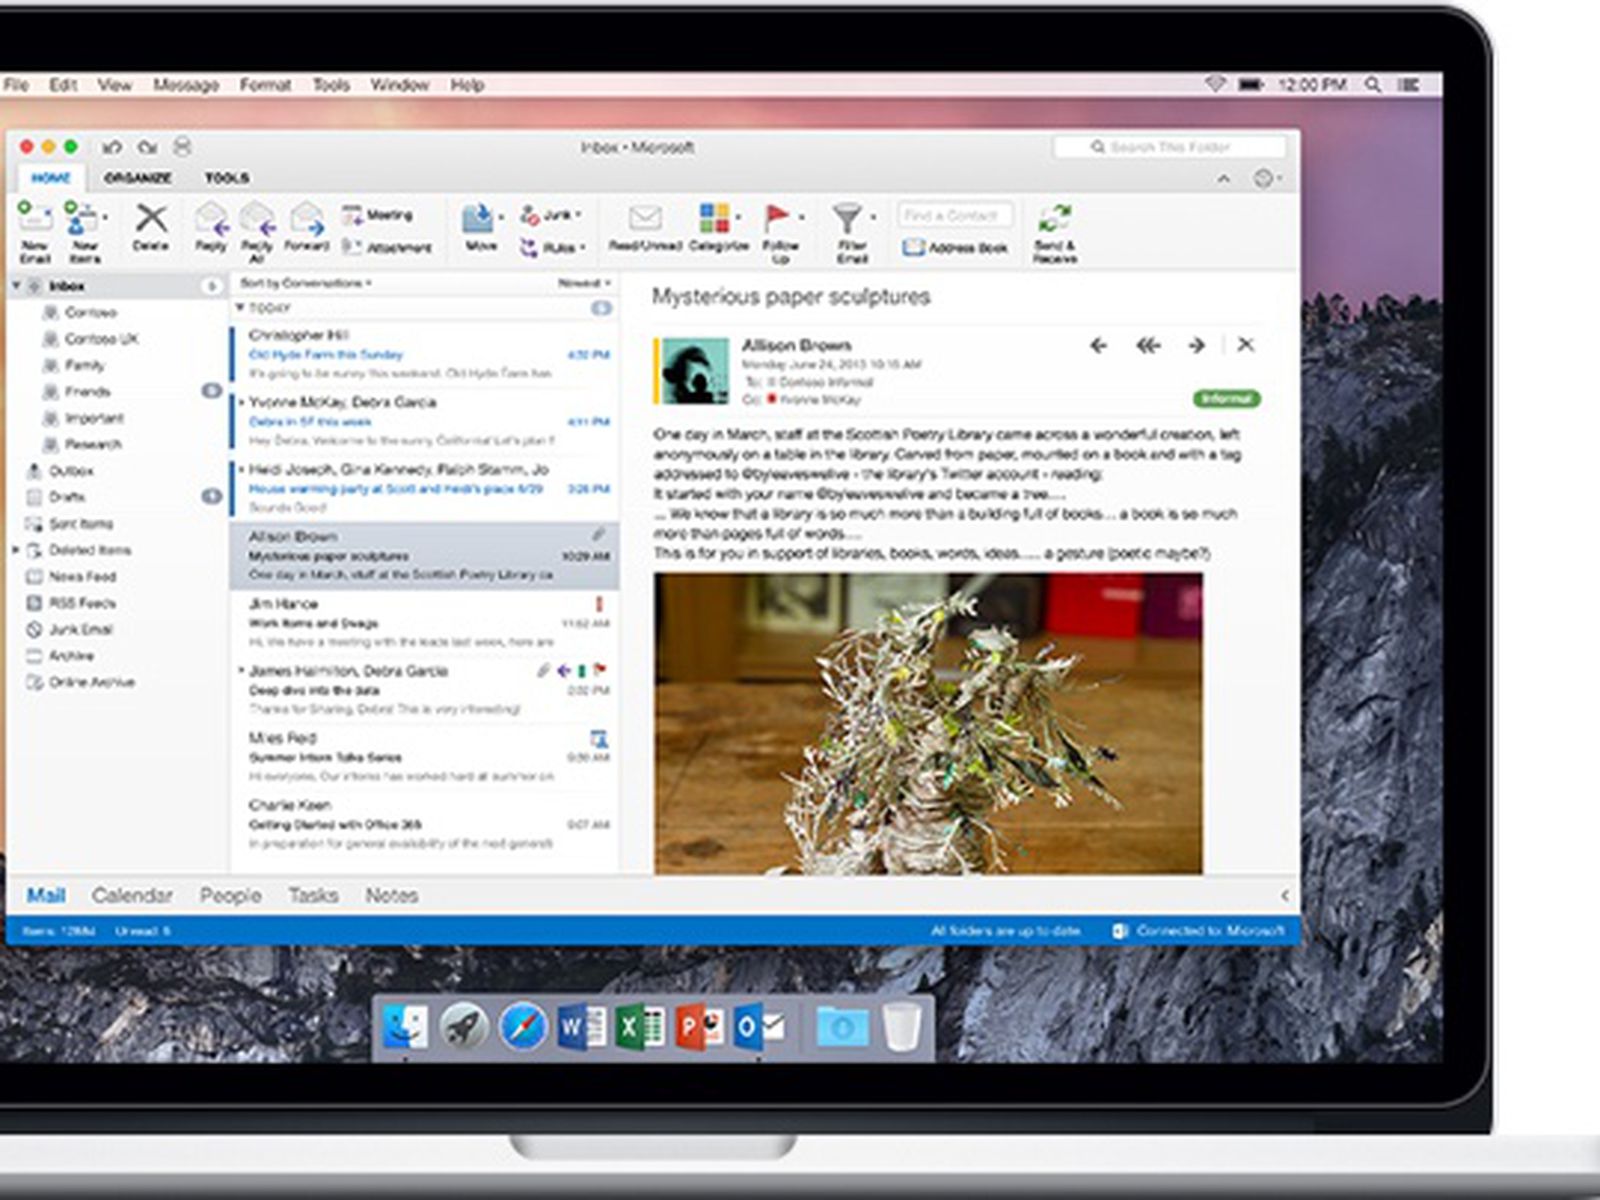 is there office 2016 for mac